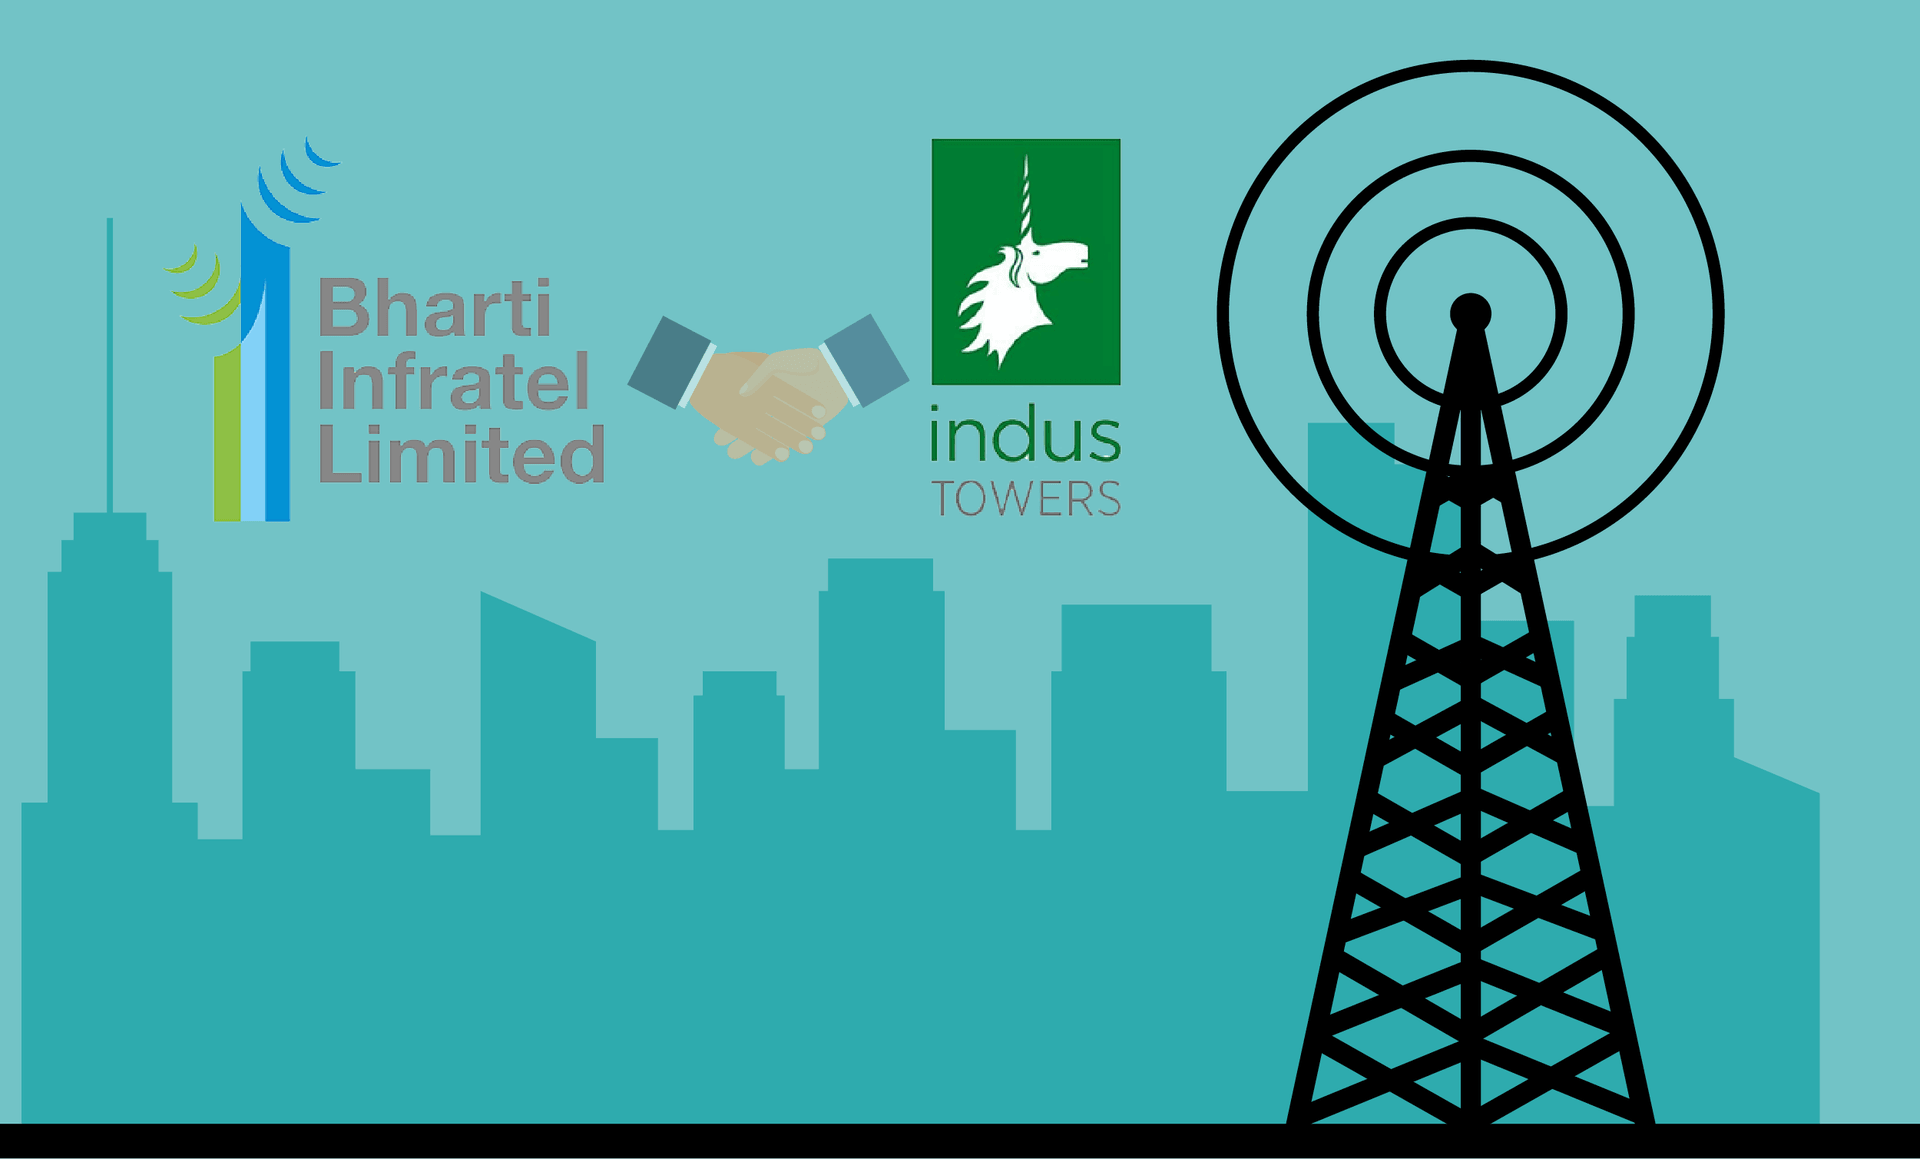 SWOT Analysis of Bharti Infratel - Bharti Infratel Merges With Indus Towers